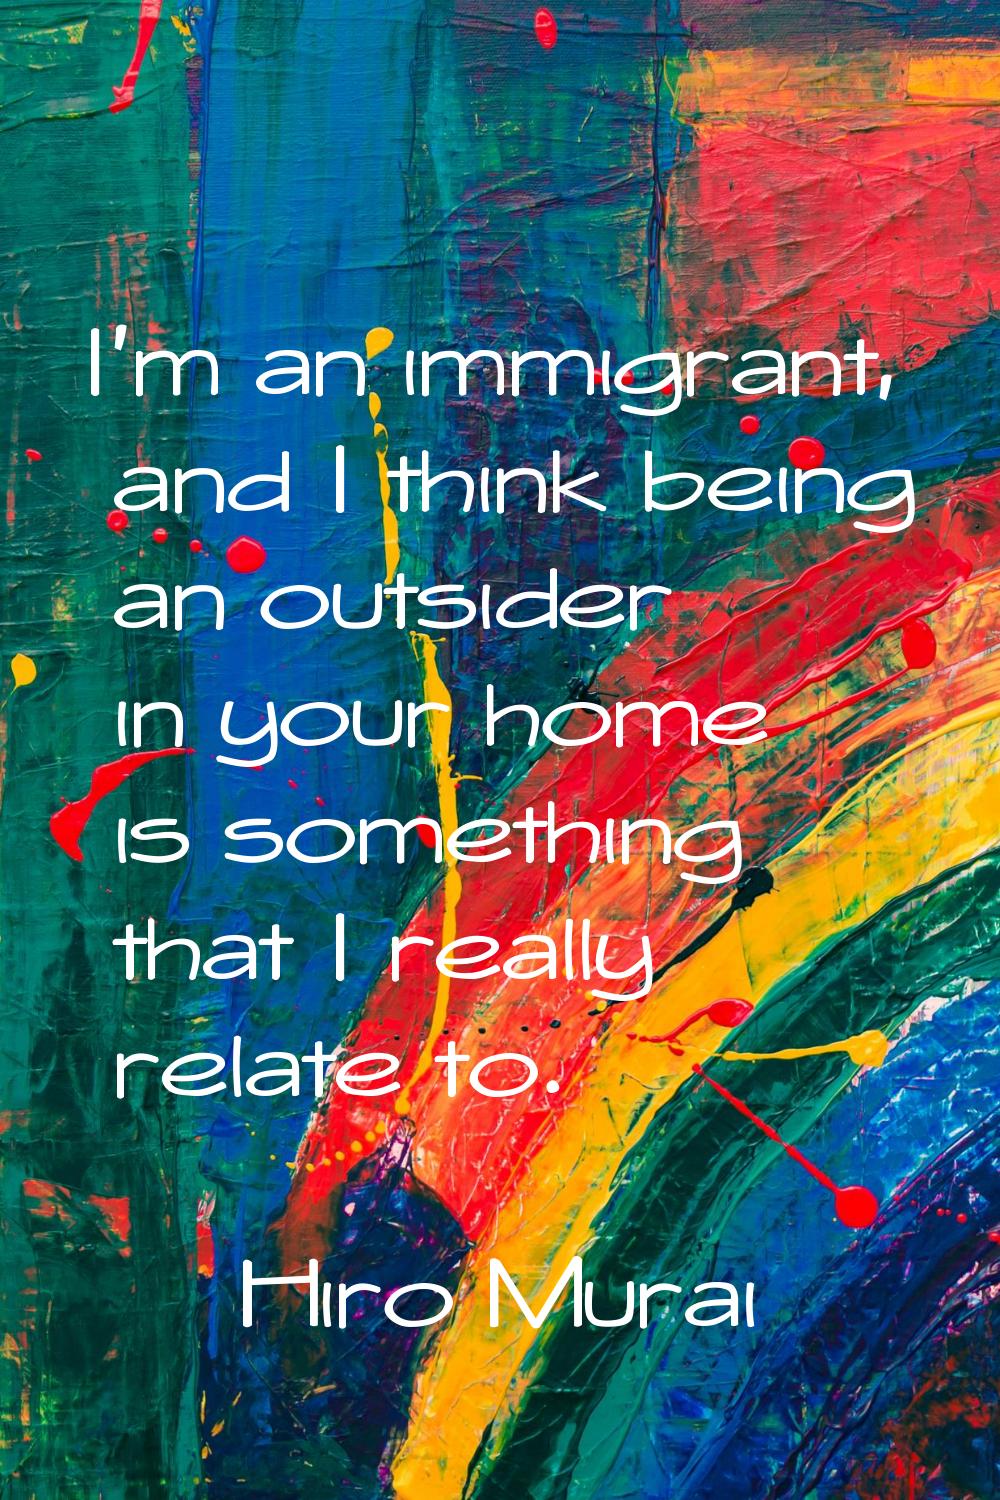 I'm an immigrant, and I think being an outsider in your home is something that I really relate to.